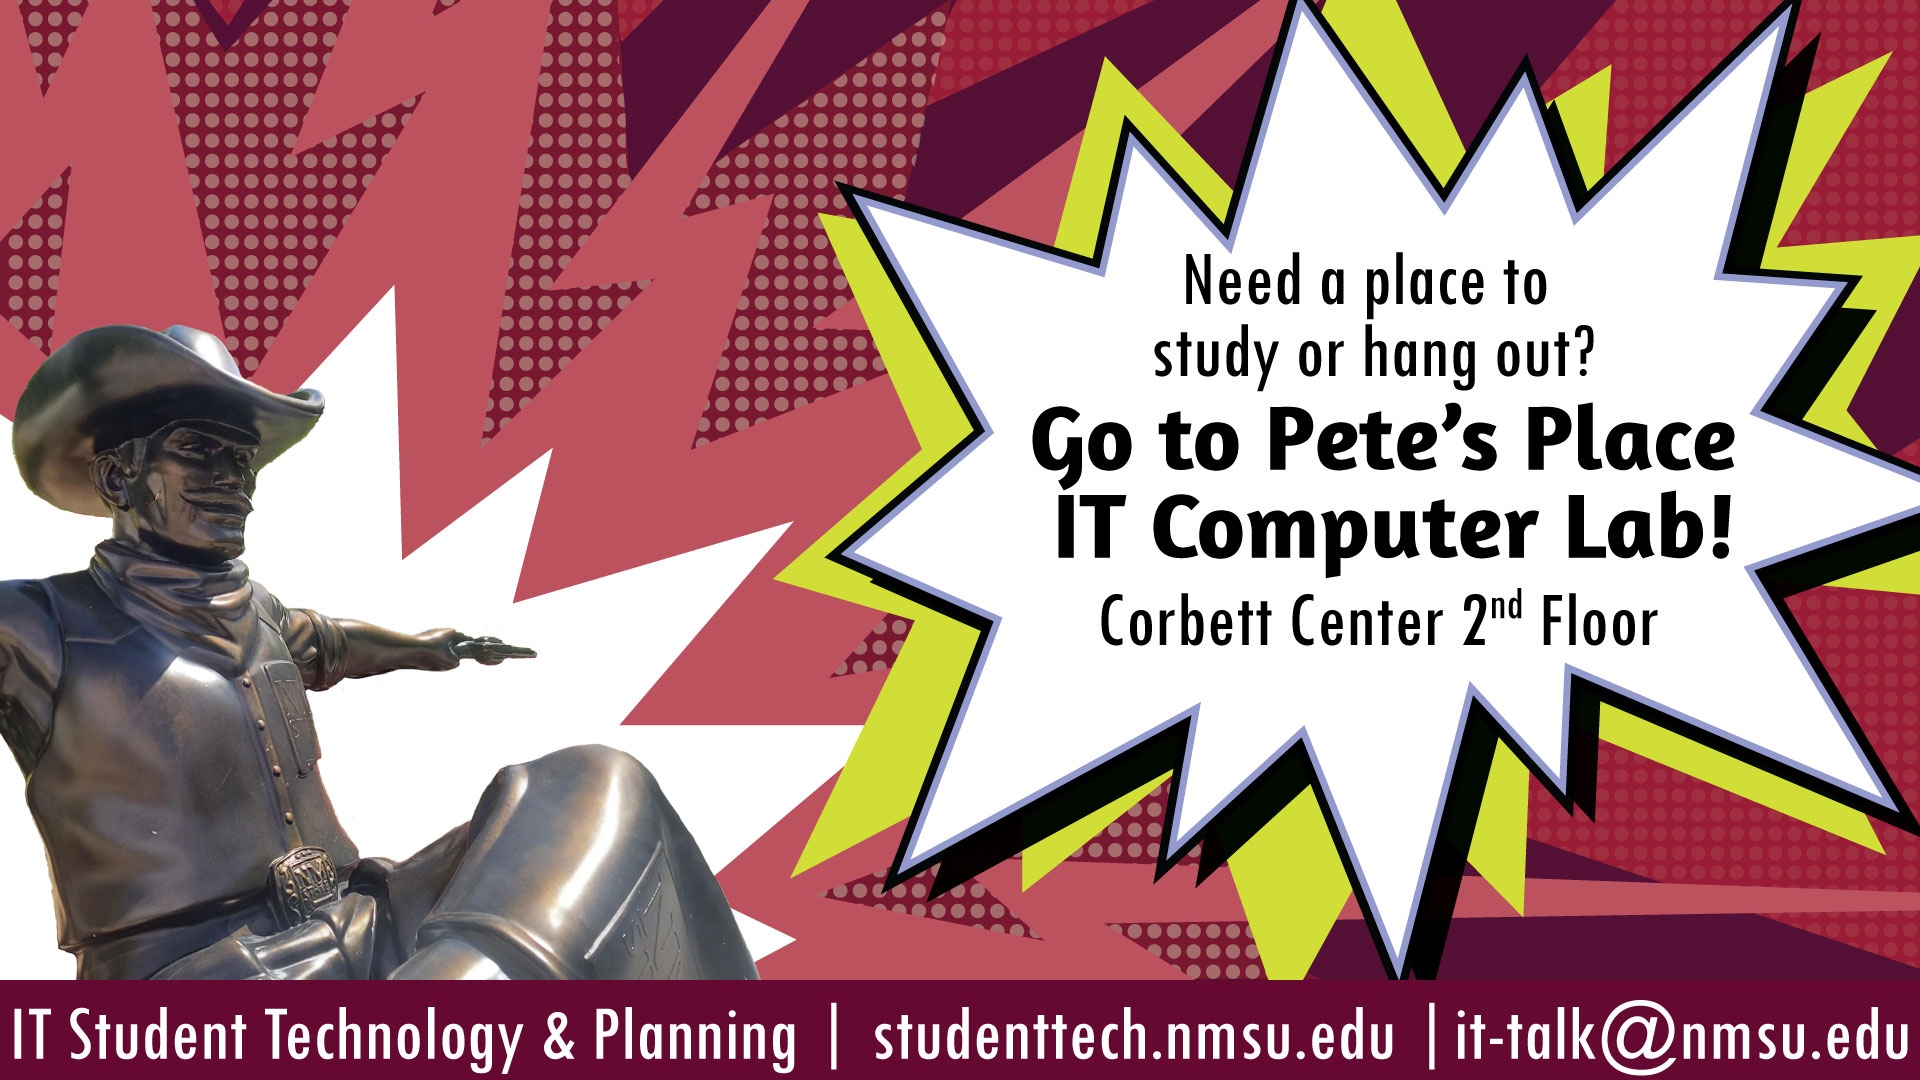 Need a place to study or hang out? Go to Pete's Place IT Computer Lab on the 2nd floor of Corbett Center!